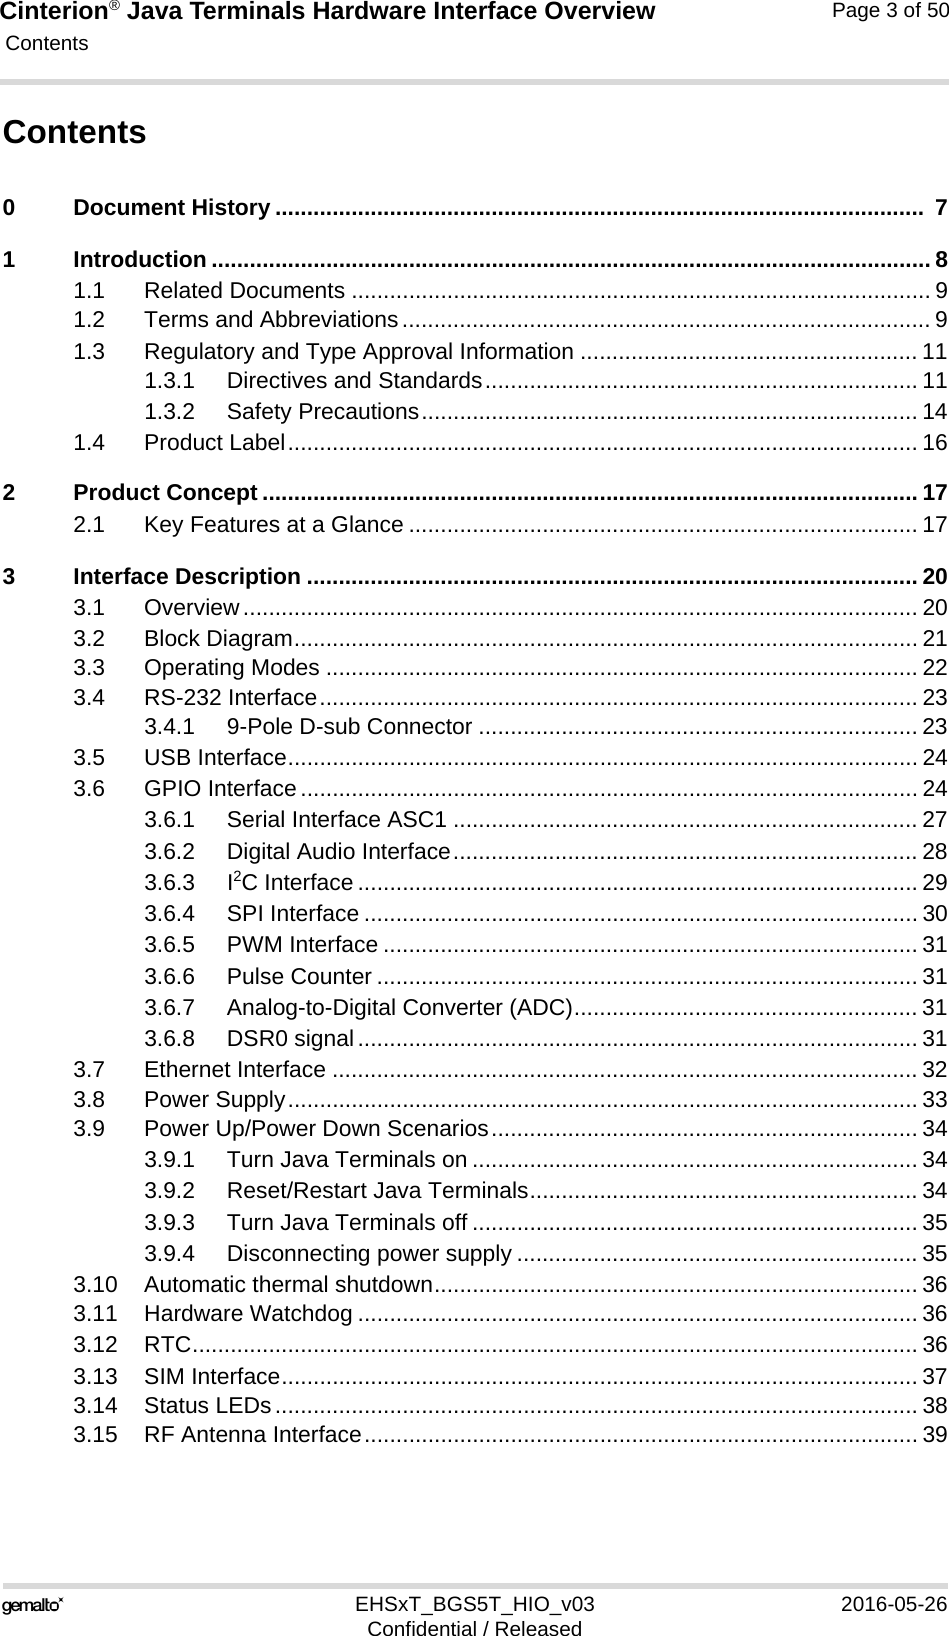 Cinterion® Java Terminals Hardware Interface Overview Contents124EHSxT_BGS5T_HIO_v03 2016-05-26Confidential / ReleasedPage 3 of 50Contents0 Document History ......................................................................................................  71 Introduction ................................................................................................................. 81.1 Related Documents ........................................................................................... 91.2 Terms and Abbreviations................................................................................... 91.3 Regulatory and Type Approval Information ..................................................... 111.3.1 Directives and Standards.................................................................... 111.3.2 Safety Precautions.............................................................................. 141.4 Product Label................................................................................................... 162 Product Concept ....................................................................................................... 172.1 Key Features at a Glance ................................................................................ 173 Interface Description ................................................................................................ 203.1 Overview.......................................................................................................... 203.2 Block Diagram.................................................................................................. 213.3 Operating Modes ............................................................................................. 223.4 RS-232 Interface.............................................................................................. 233.4.1 9-Pole D-sub Connector ..................................................................... 233.5 USB Interface................................................................................................... 243.6 GPIO Interface................................................................................................. 243.6.1 Serial Interface ASC1 ......................................................................... 273.6.2 Digital Audio Interface......................................................................... 283.6.3 I2C Interface ........................................................................................ 293.6.4 SPI Interface ....................................................................................... 303.6.5 PWM Interface .................................................................................... 313.6.6 Pulse Counter ..................................................................................... 313.6.7 Analog-to-Digital Converter (ADC)...................................................... 313.6.8 DSR0 signal........................................................................................ 313.7 Ethernet Interface ............................................................................................ 323.8 Power Supply................................................................................................... 333.9 Power Up/Power Down Scenarios................................................................... 343.9.1 Turn Java Terminals on ...................................................................... 343.9.2 Reset/Restart Java Terminals............................................................. 343.9.3 Turn Java Terminals off ...................................................................... 353.9.4 Disconnecting power supply ............................................................... 353.10 Automatic thermal shutdown............................................................................ 363.11 Hardware Watchdog ........................................................................................ 363.12 RTC.................................................................................................................. 363.13 SIM Interface.................................................................................................... 373.14 Status LEDs..................................................................................................... 383.15 RF Antenna Interface....................................................................................... 39